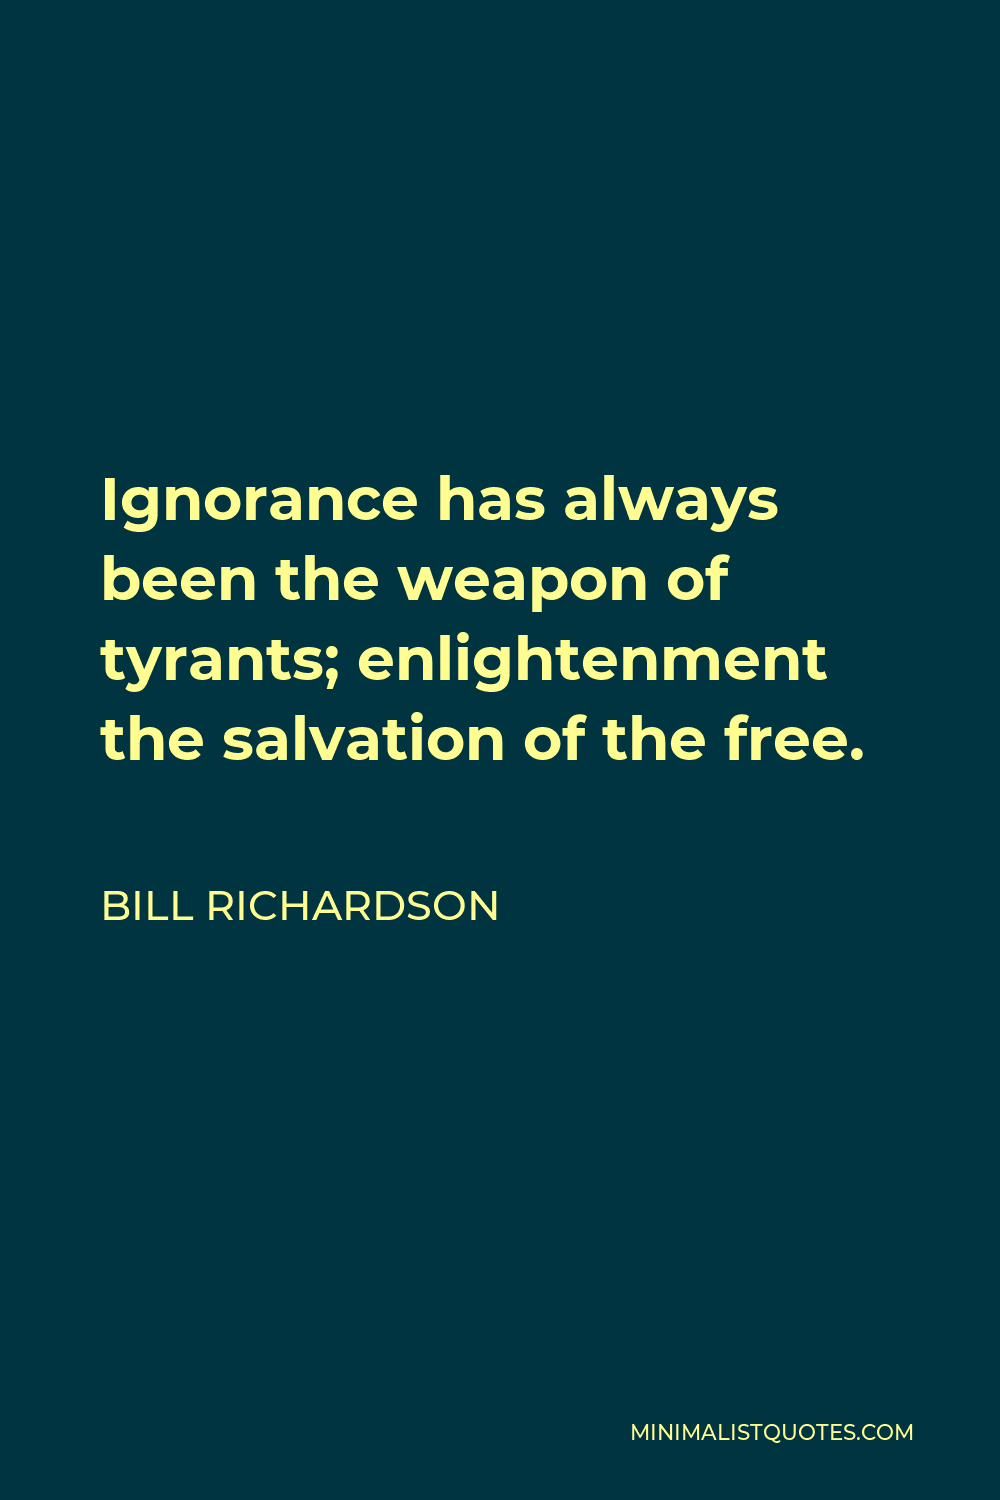 Bill Richardson Quote - Ignorance has always been the weapon of tyrants; enlightenment the salvation of the free.